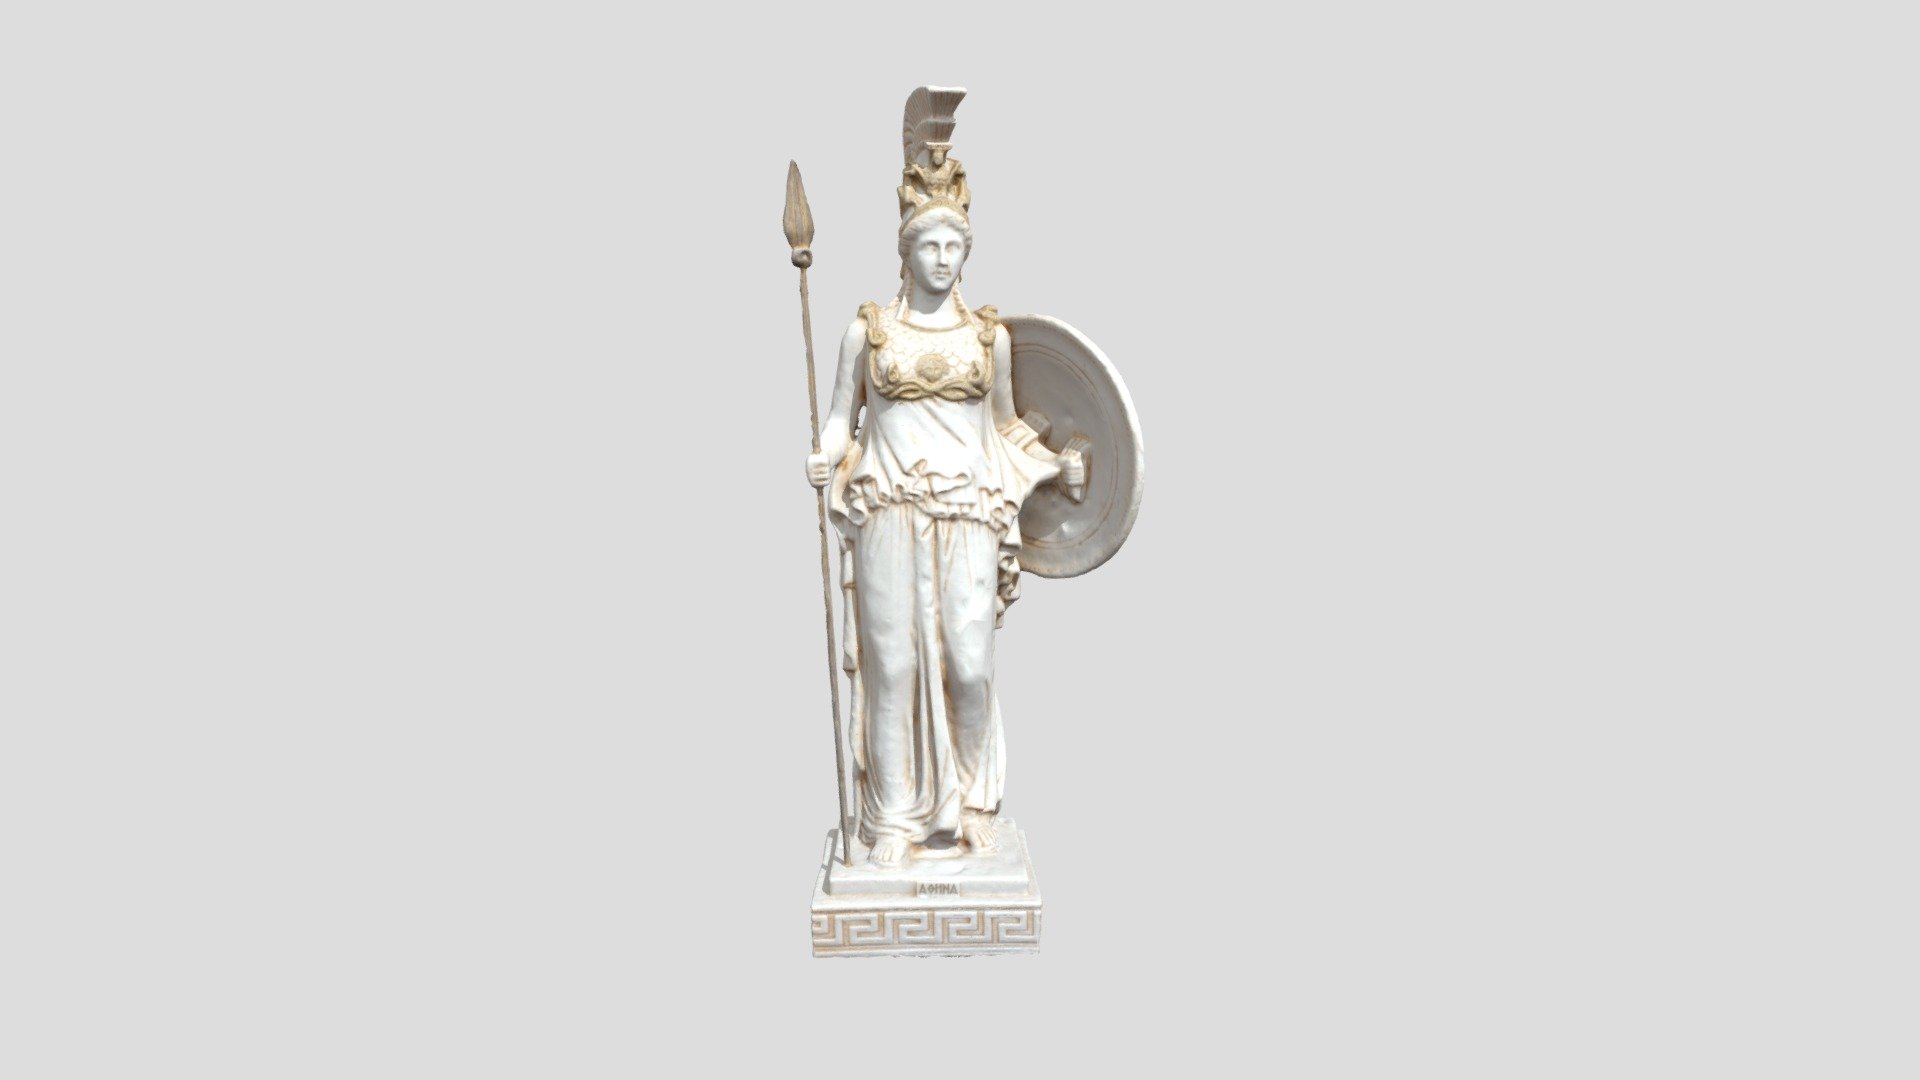 A 3D model of Athena Promachos generated through photogrammetry 3d model